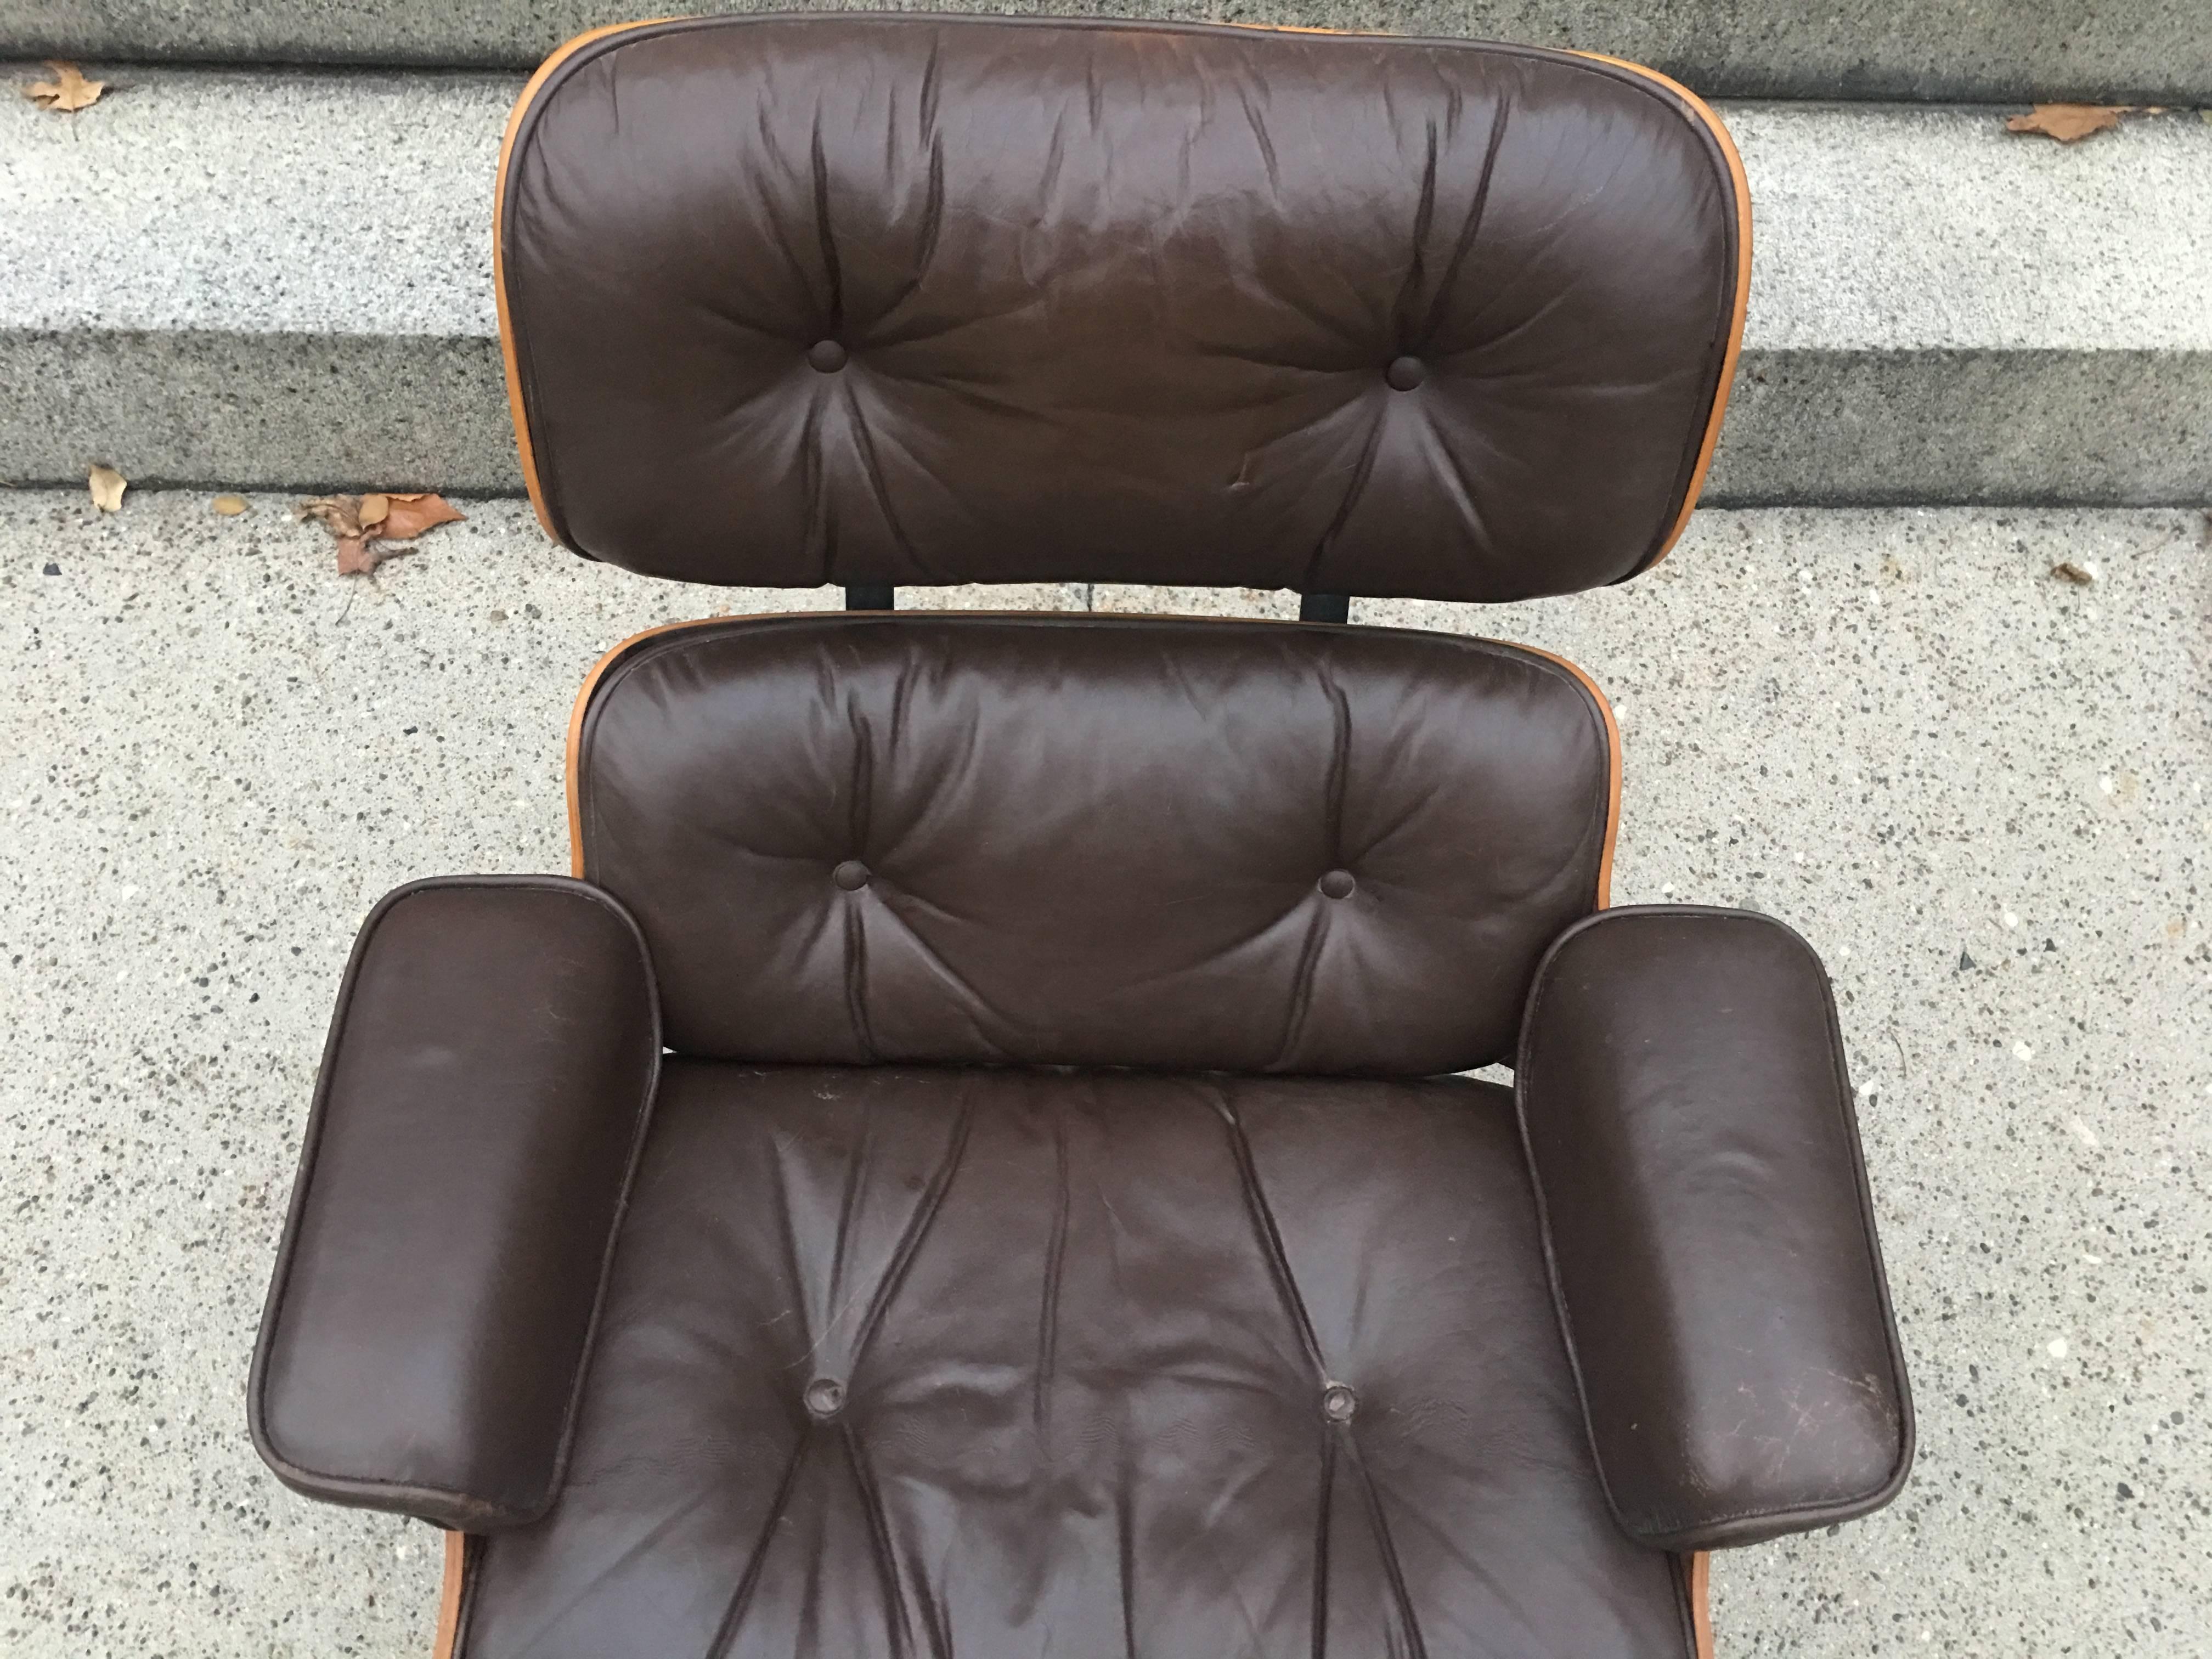 Gorgeous Herman Miller Eames 670 lounge chair in Brazilian rosewood. Original leather cushions in excellent condition. Leather has been cleaned and conditioned. Chair dates to the 1970s.